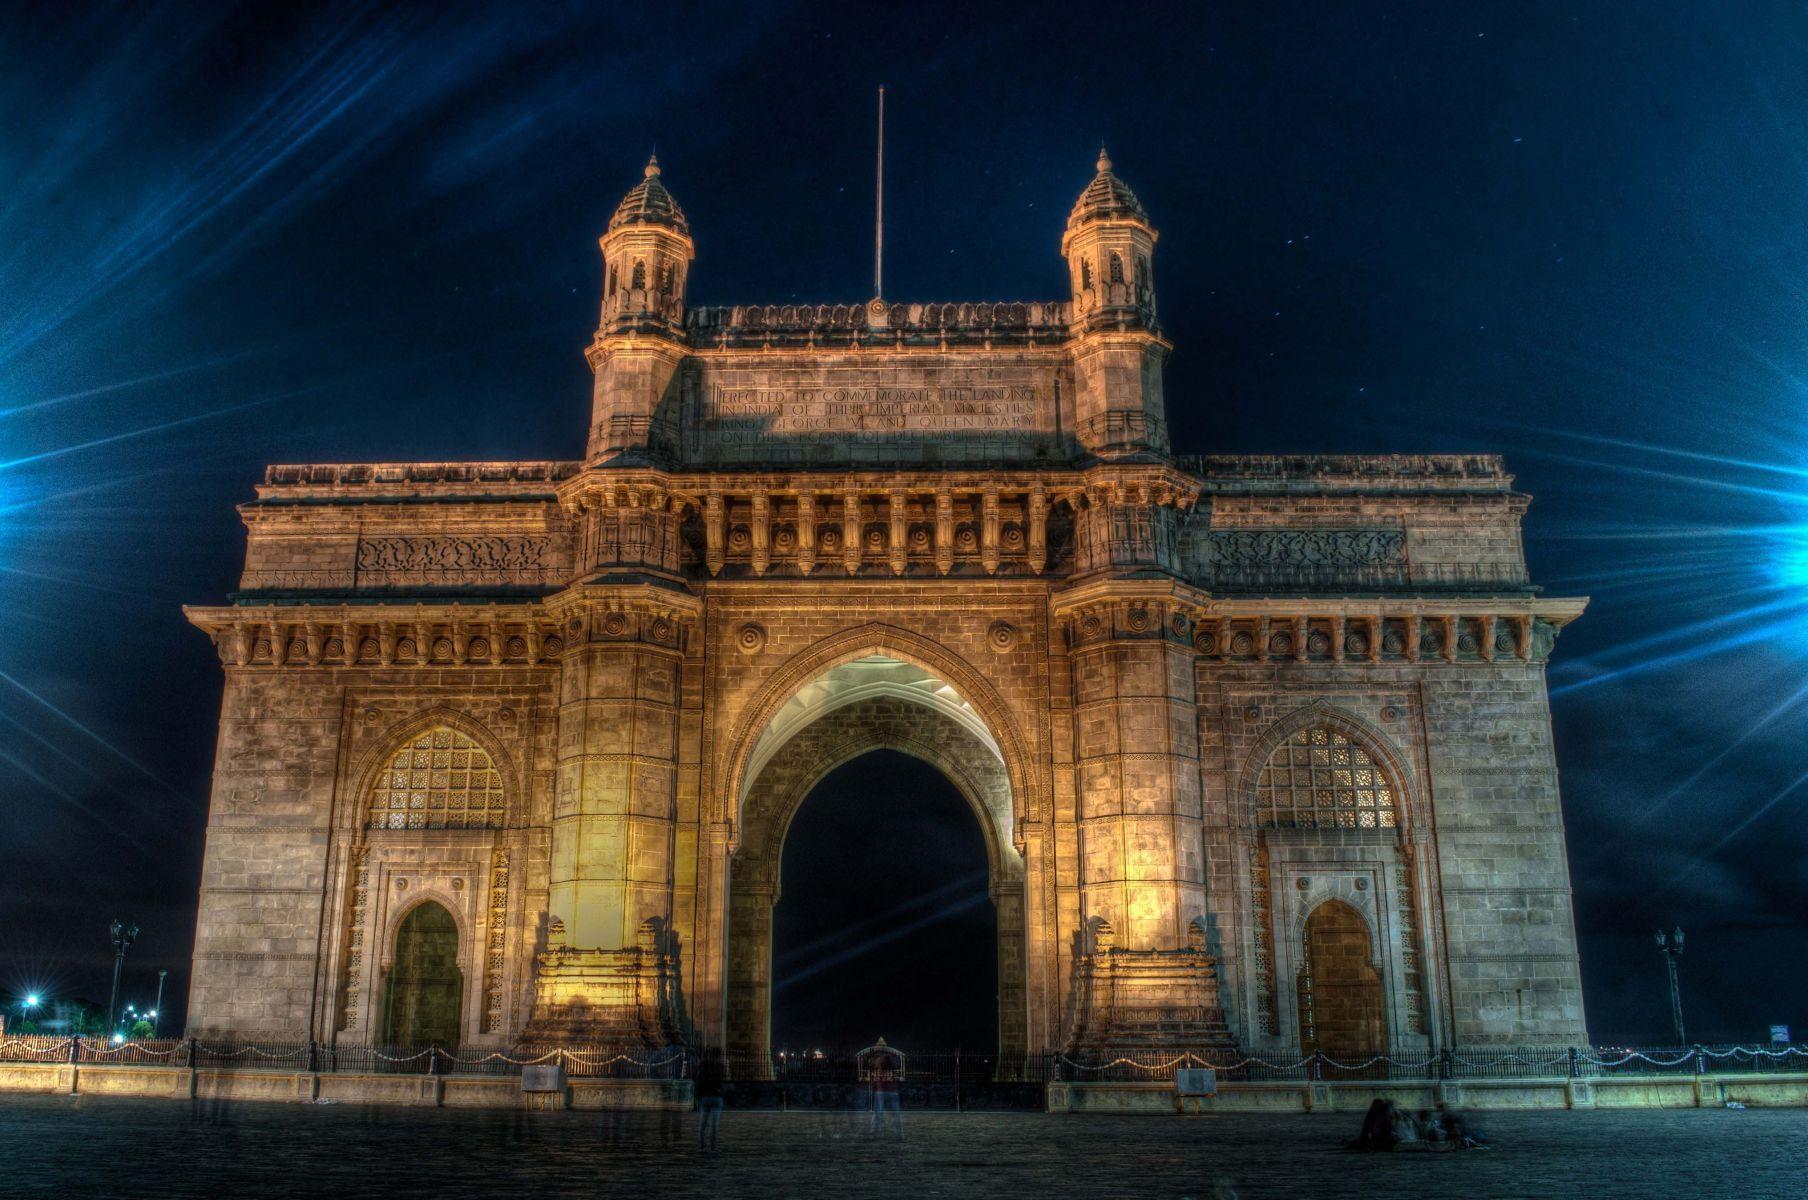 At Night Picture Of Gateway Of India. HD Travel Wallpaper